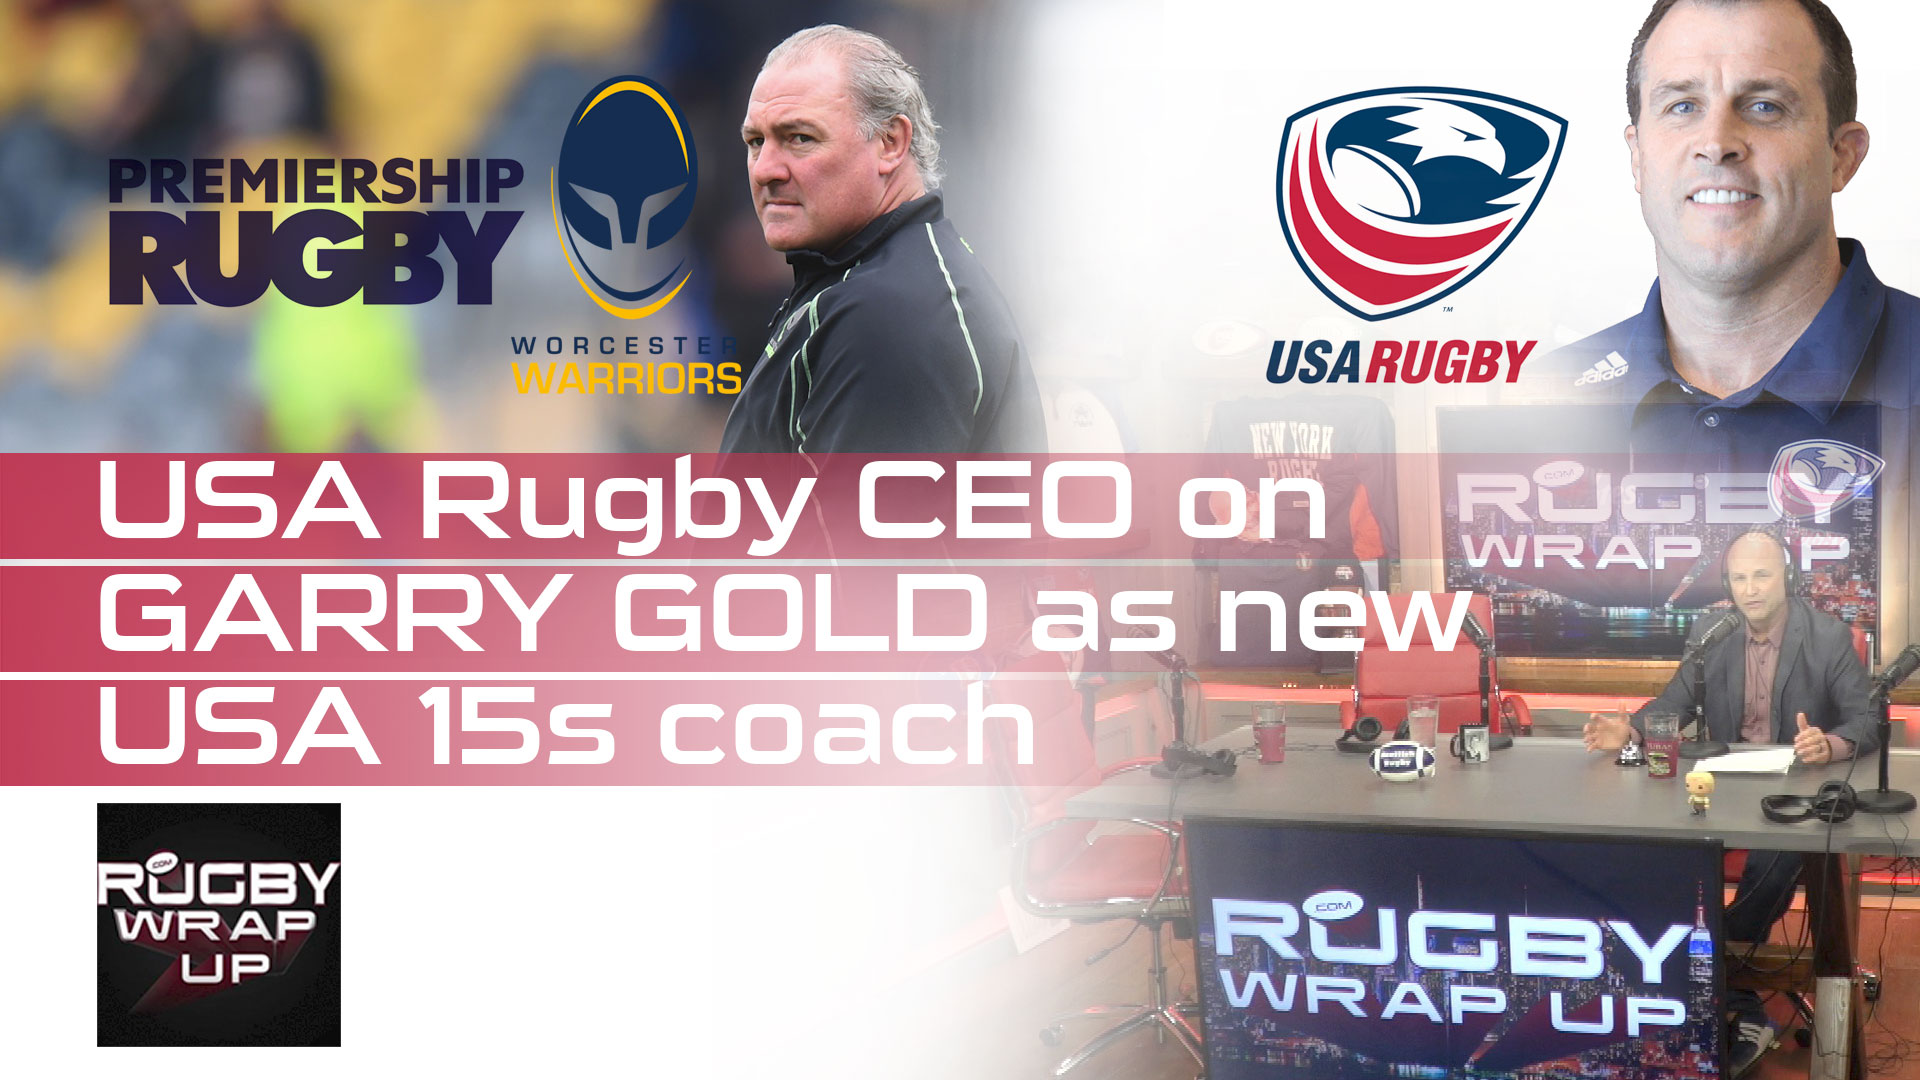 USA-Rugby-CEO Dan_Payne -on-Garry-Gold-NEW-Eagles-COACH - RugbyWrapUp.com